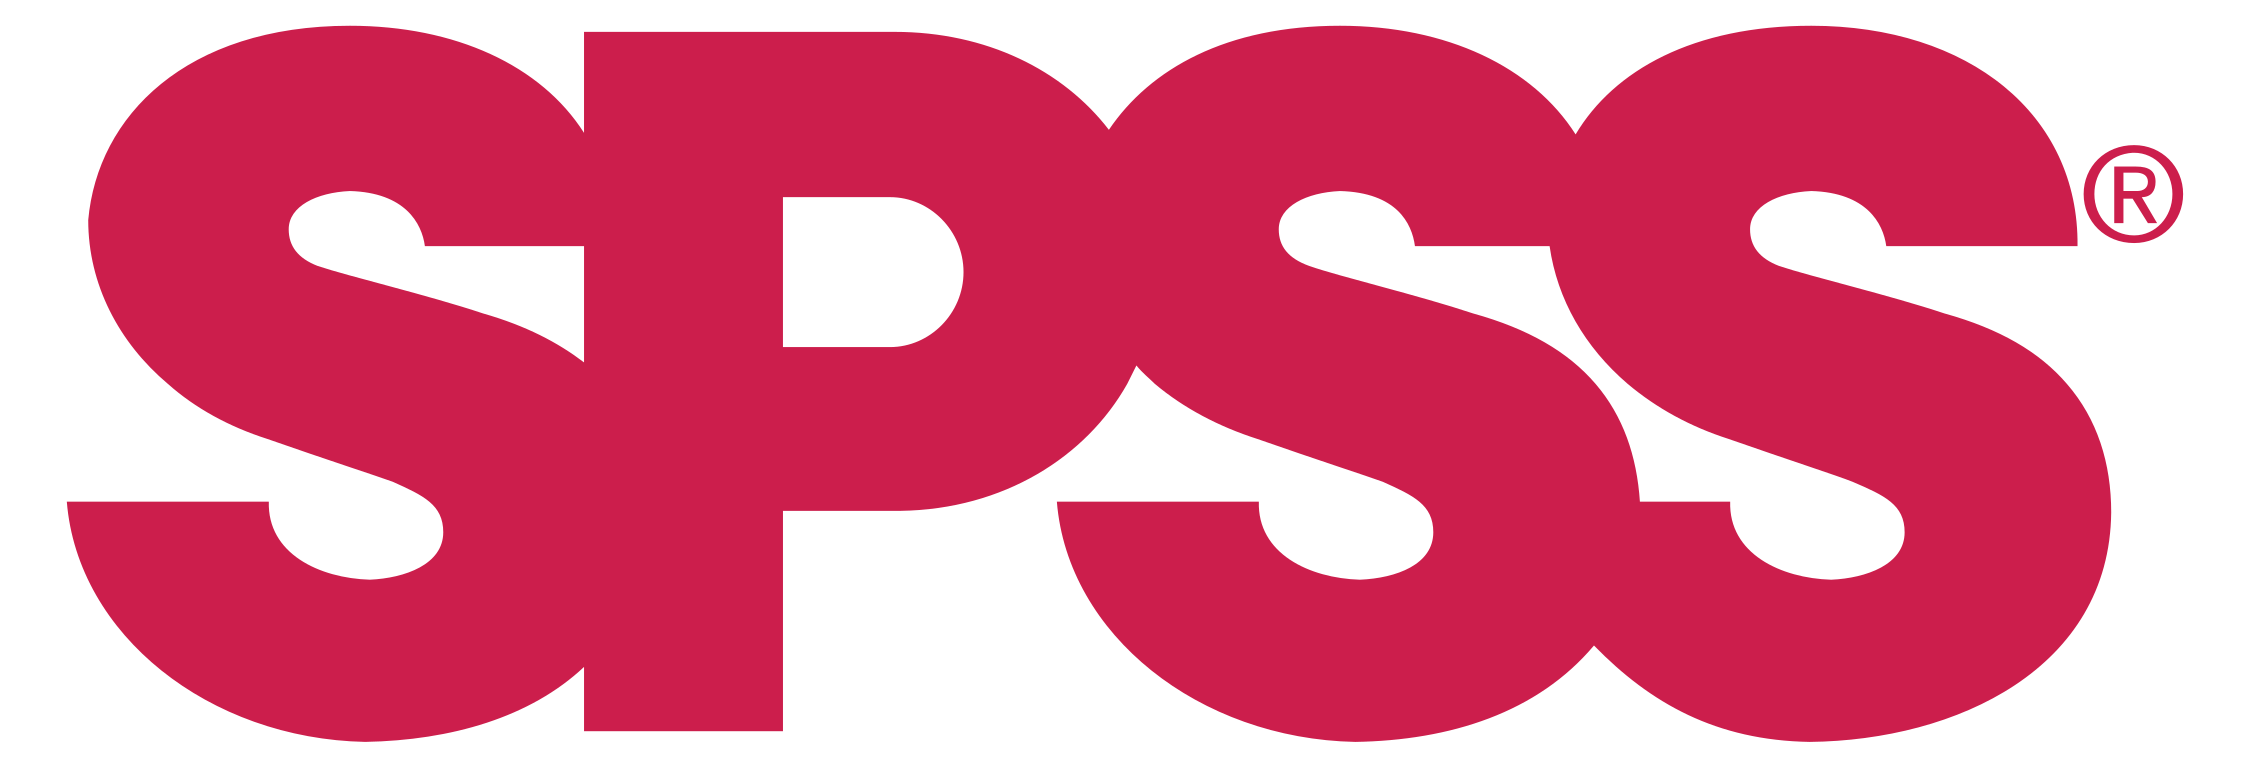 spss logo png